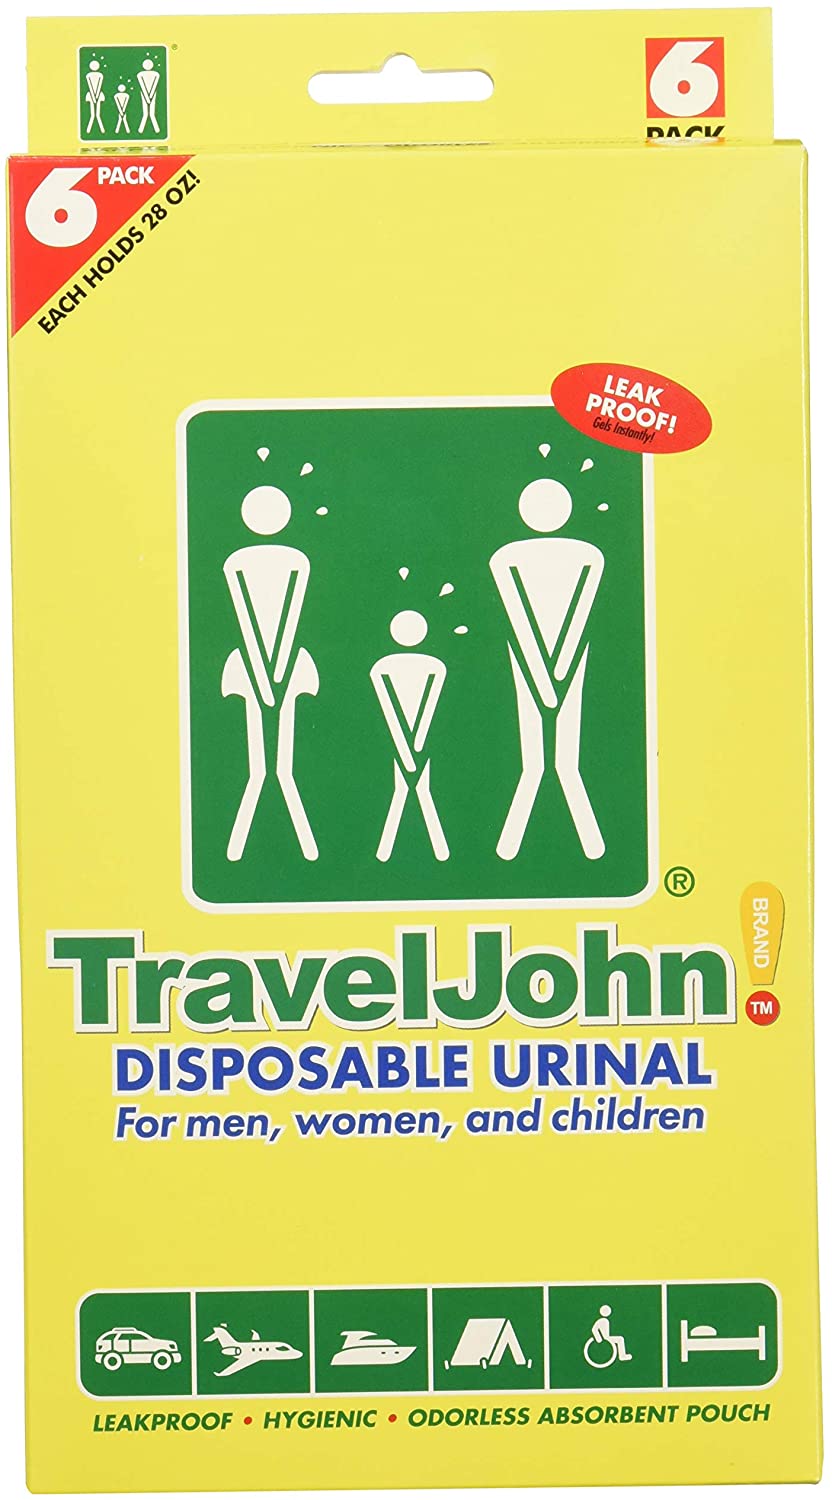 Disposable Urinals